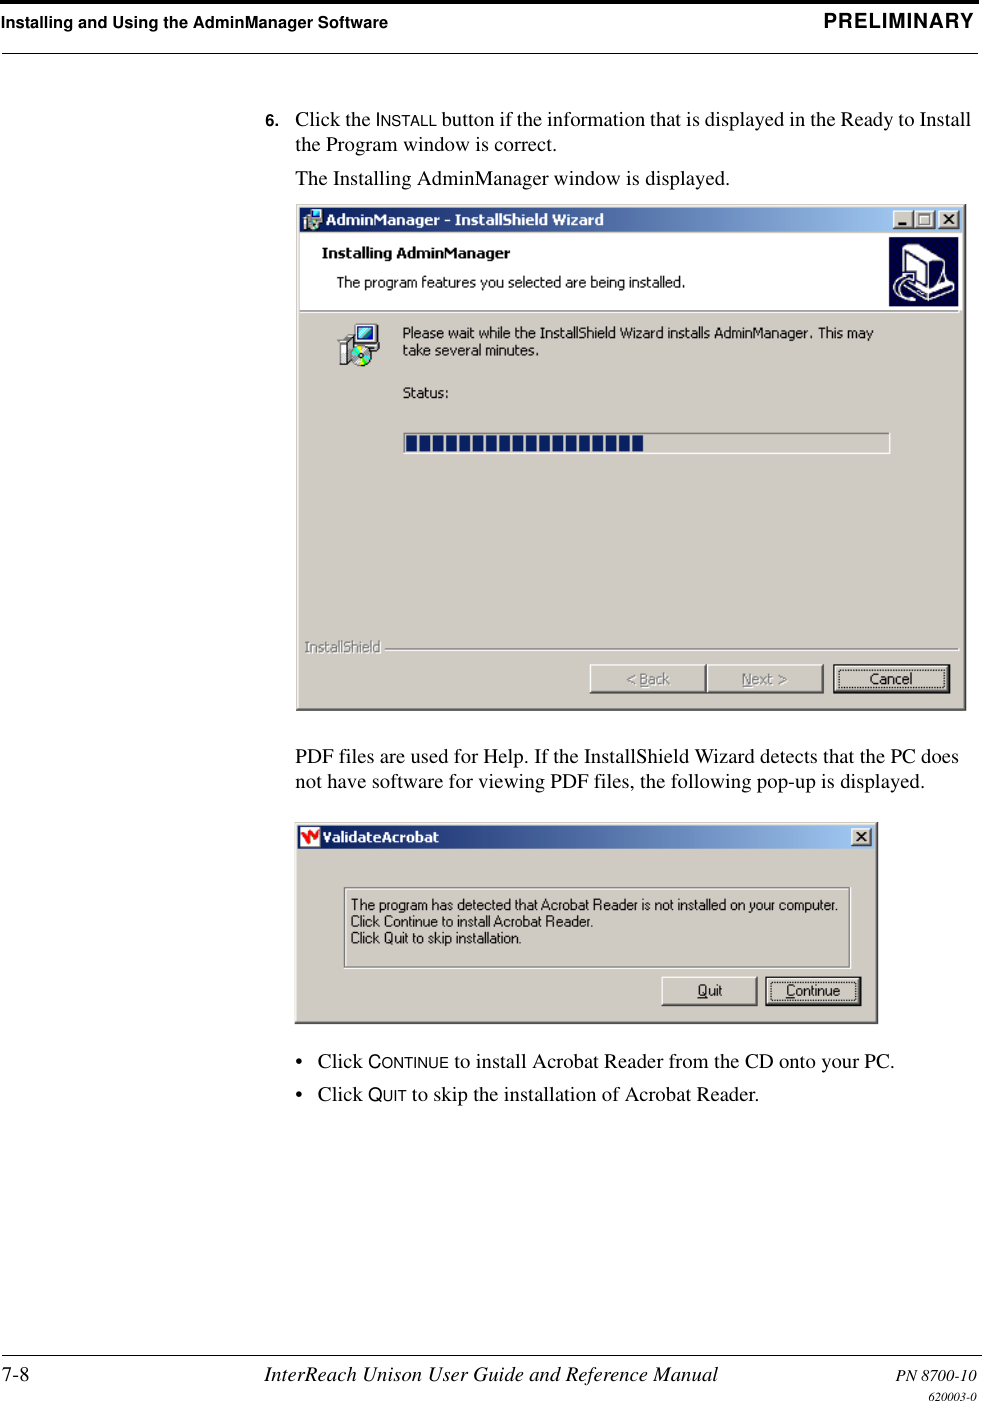 Installing and Using the AdminManager Software PRELIMINARY7-8 InterReach Unison User Guide and Reference Manual PN 8700-10620003-06. Click the INSTALL button if the information that is displayed in the Ready to Install the Program window is correct.The Installing AdminManager window is displayed.PDF files are used for Help. If the InstallShield Wizard detects that the PC does not have software for viewing PDF files, the following pop-up is displayed.• Click CONTINUE to install Acrobat Reader from the CD onto your PC.• Click QUIT to skip the installation of Acrobat Reader.